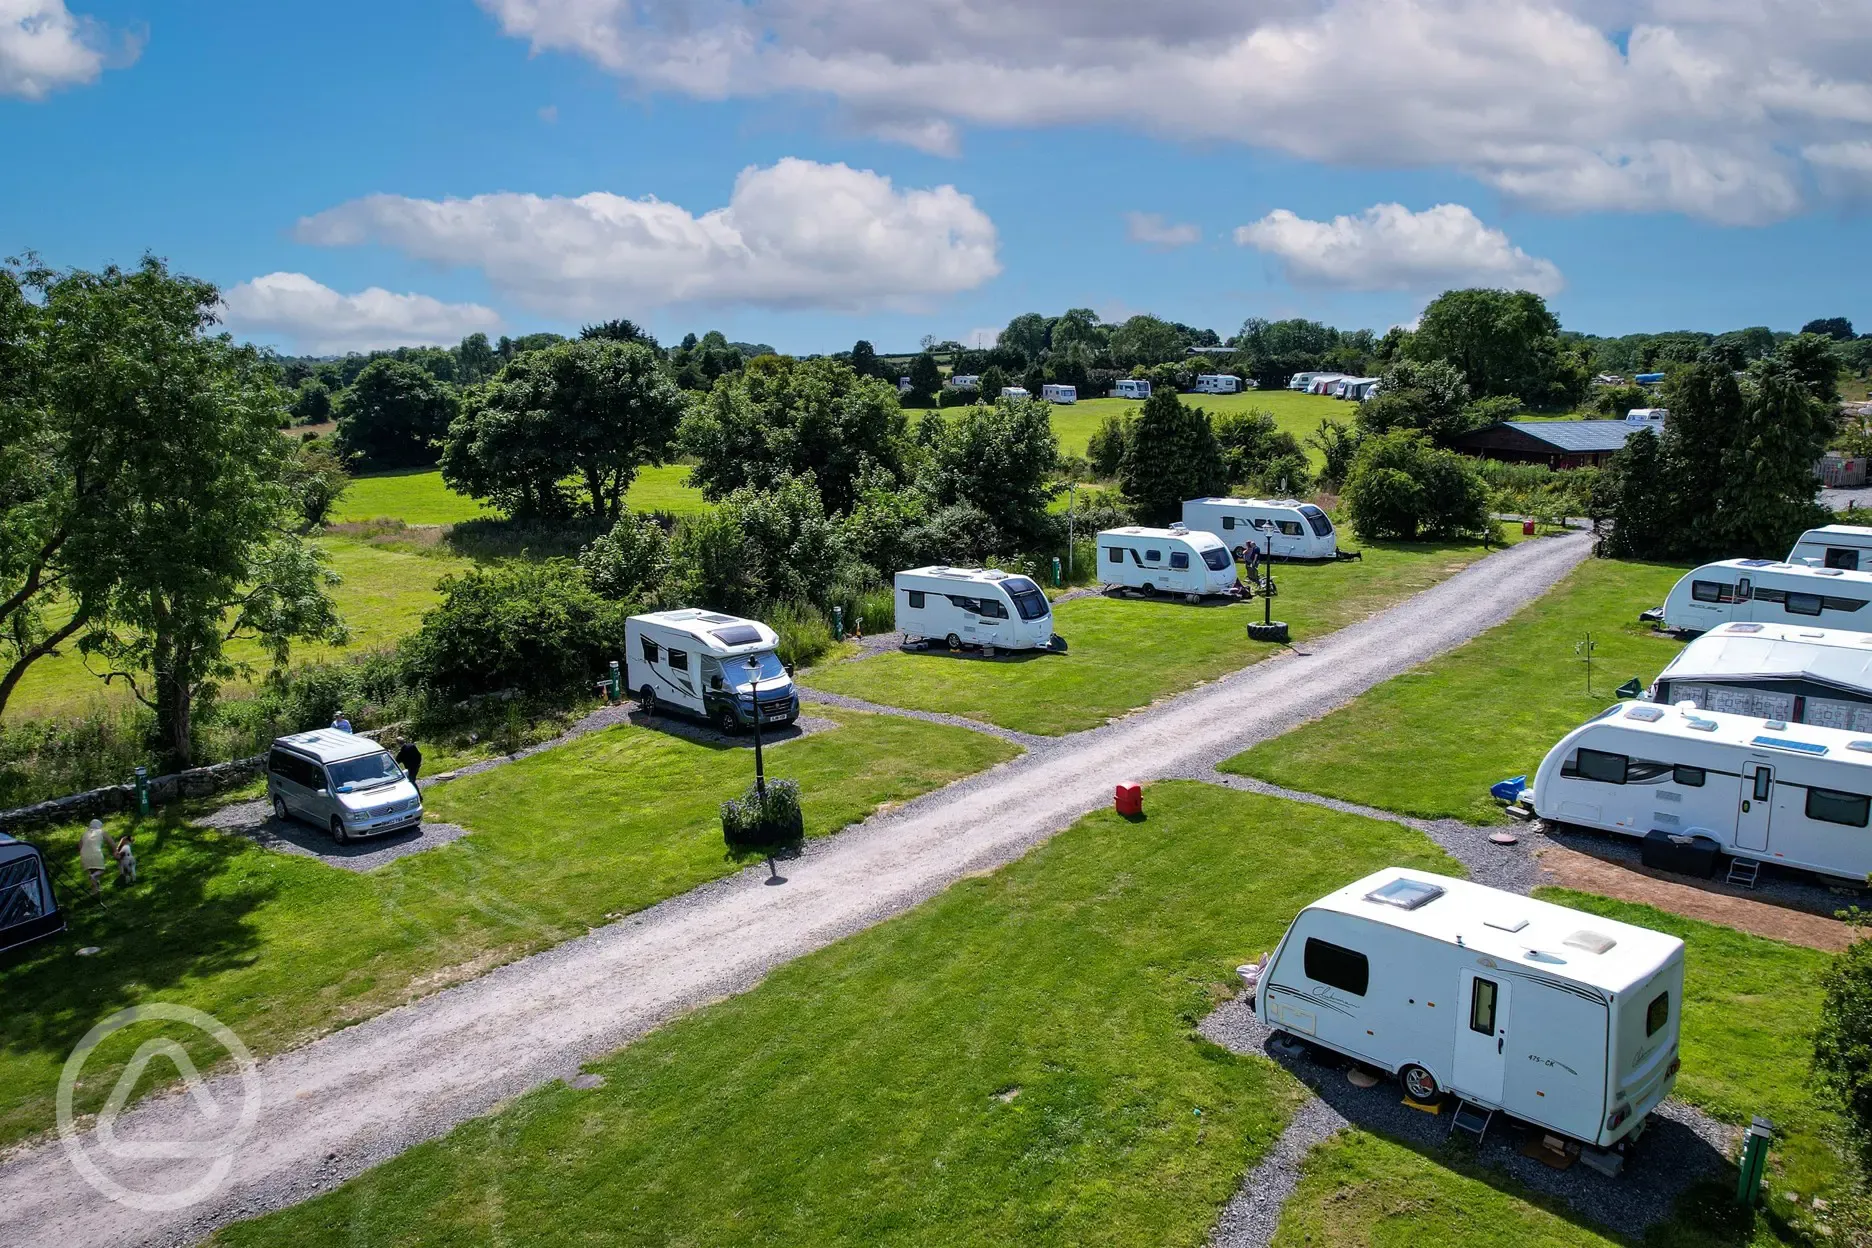 Overview of the fully serviced hardstanding and grass pitches